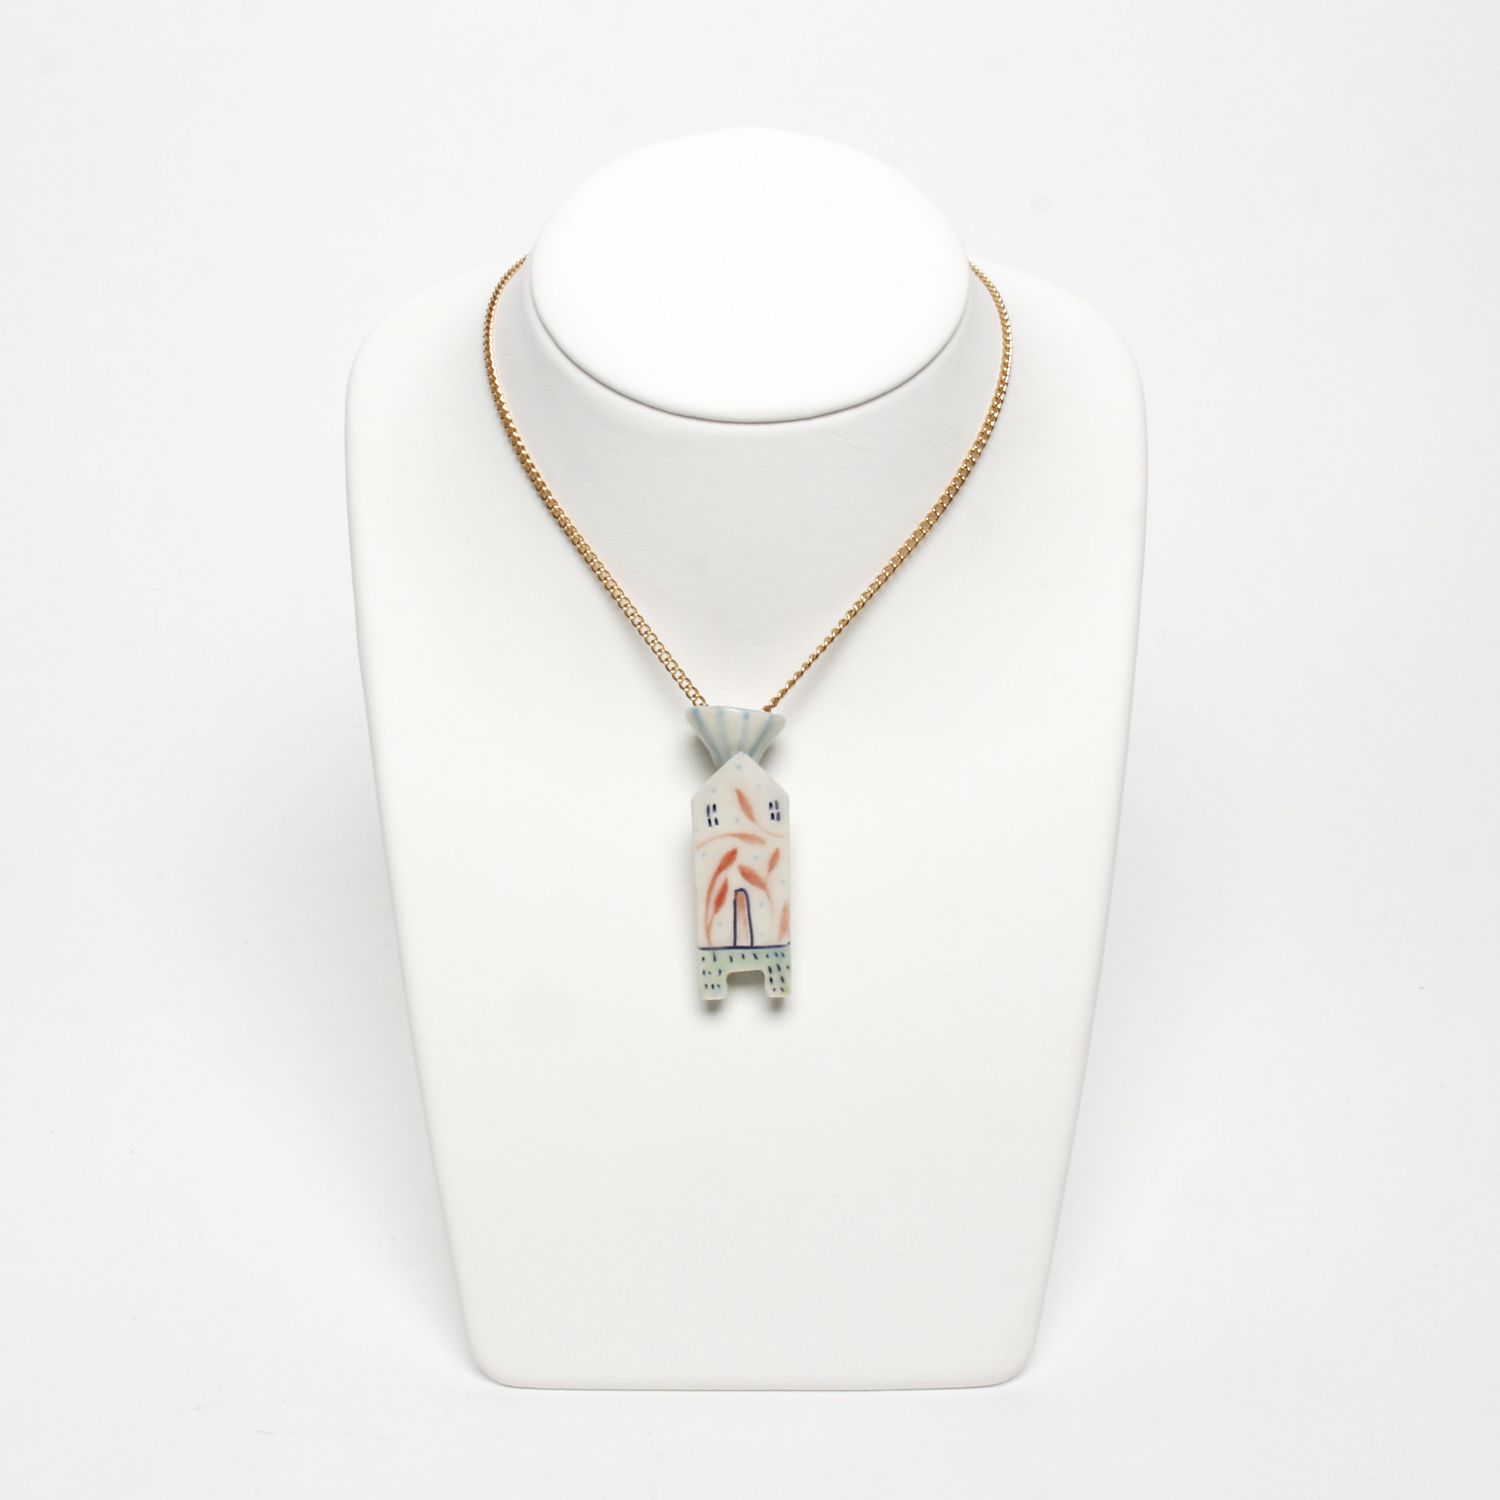 Maria Moldovan: House Pendant Necklace Product Image 1 of 3